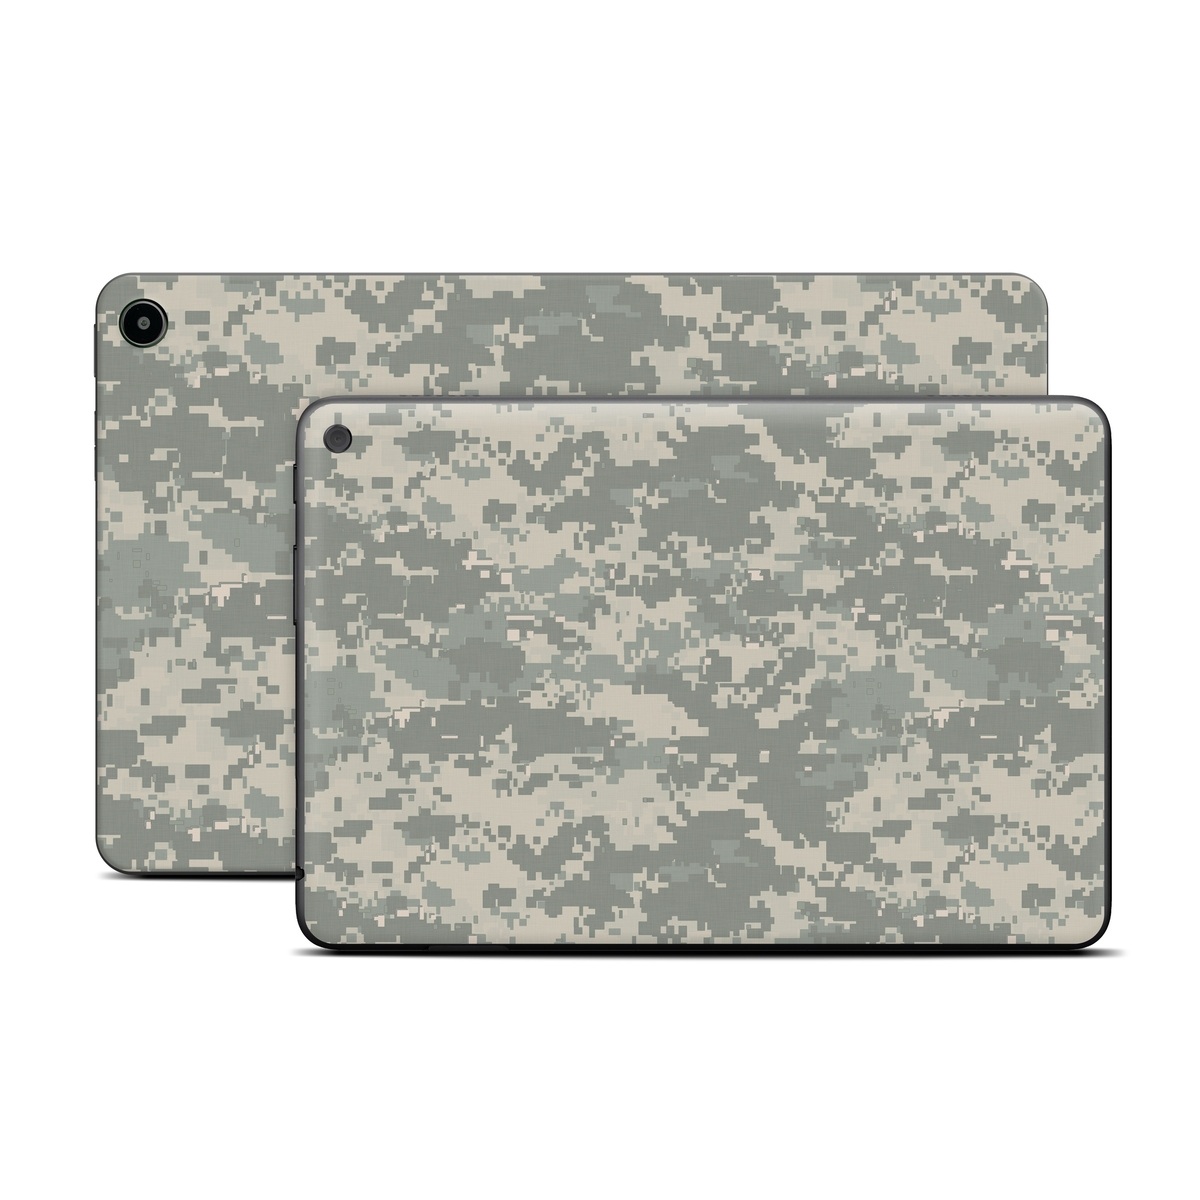 Amazon Fire Tablet Series Skin Skin design of Military camouflage, Green, Pattern, Uniform, Camouflage, Design, Wallpaper, with gray, green colors